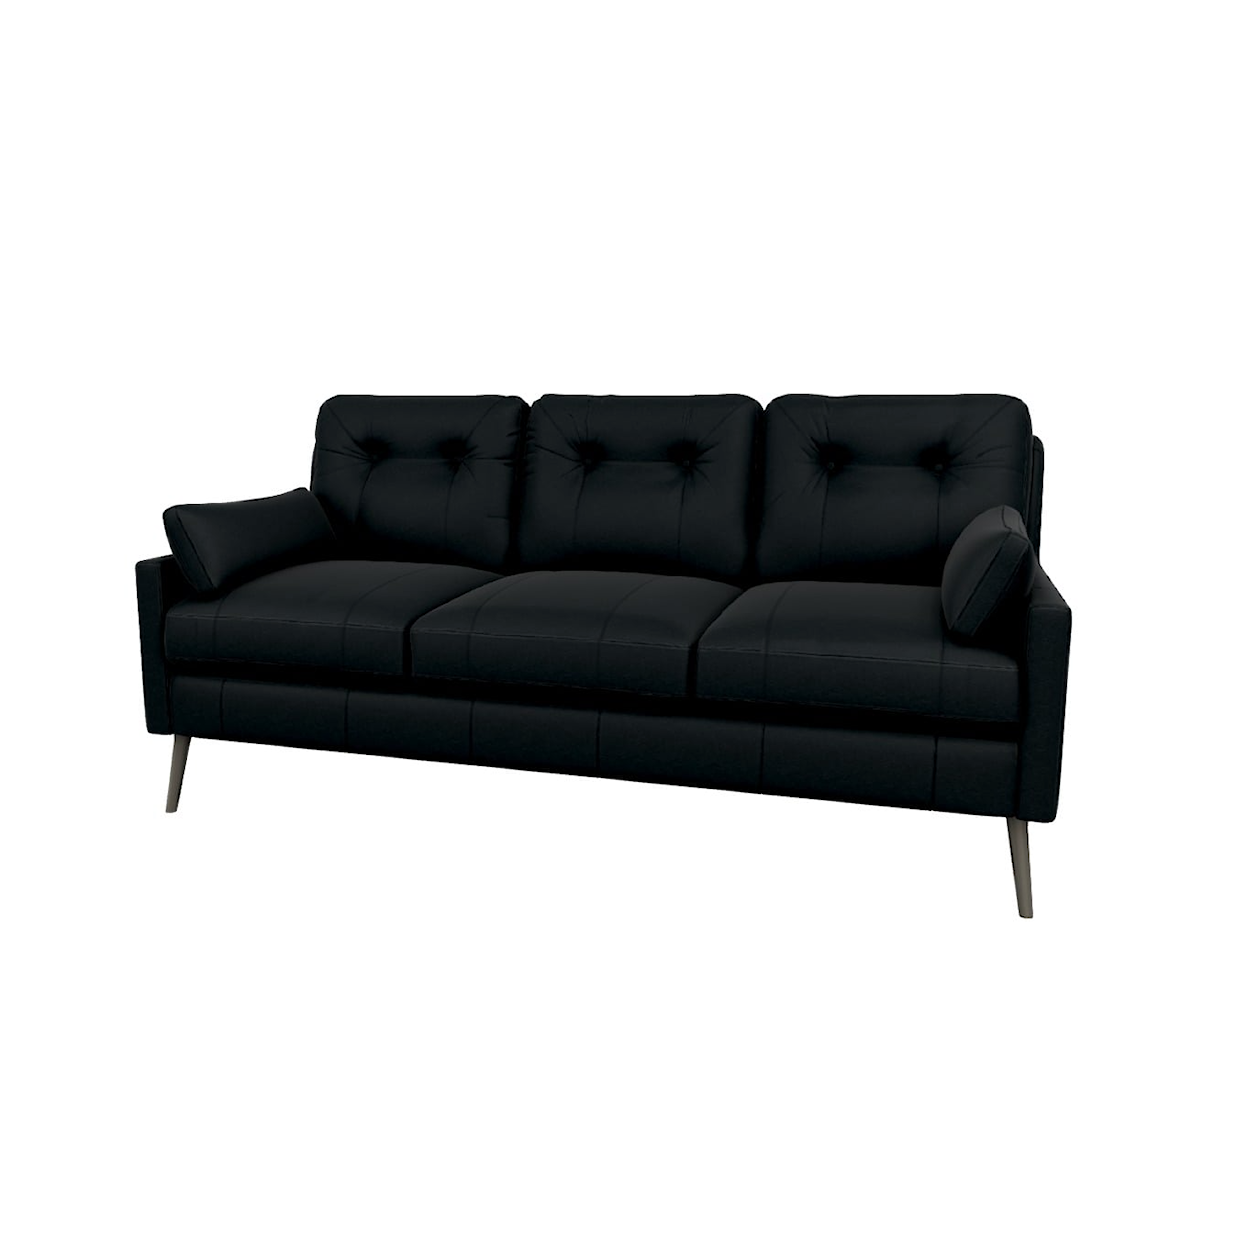 Bravo Furniture Trevin Stationary Sofa With Throw Pillows